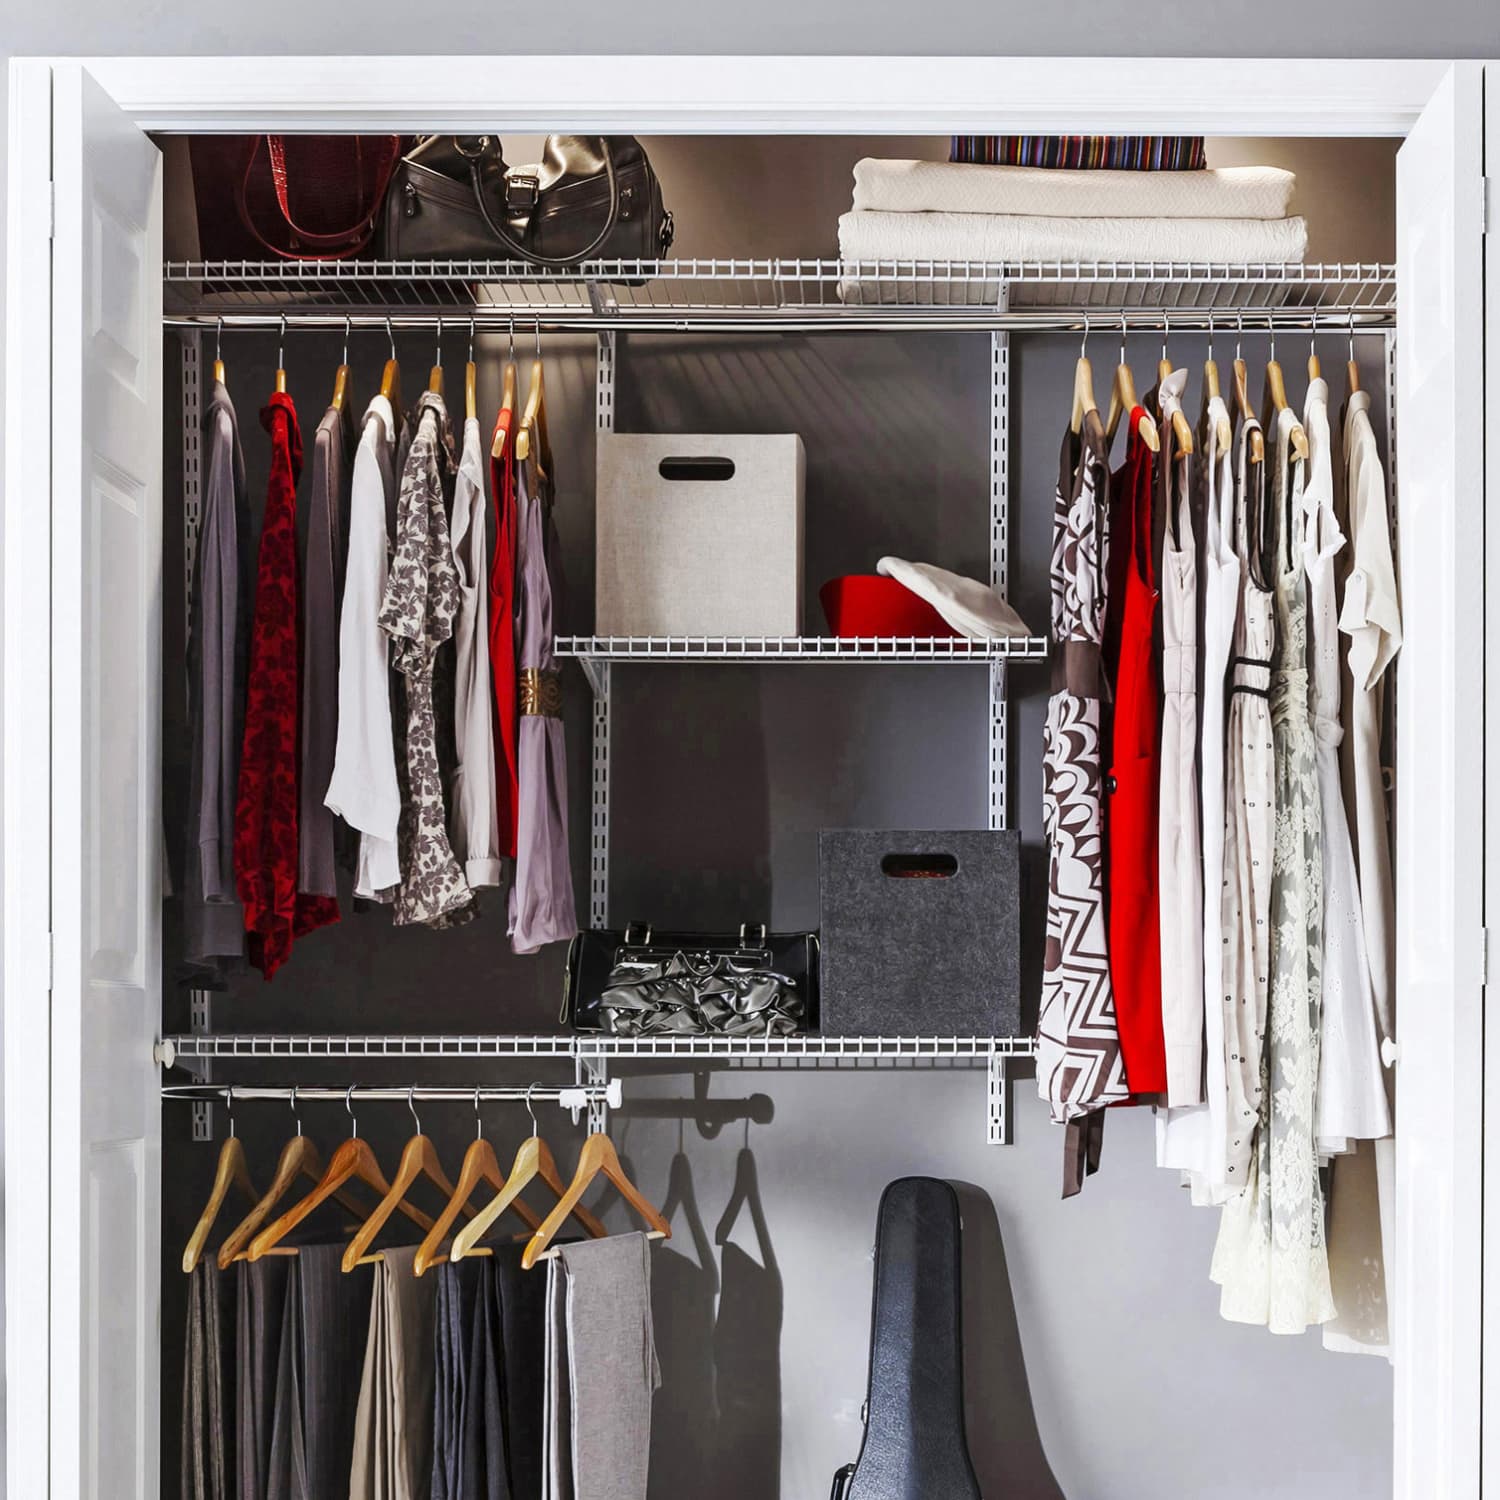 How to Clean Wire Closet Shelving